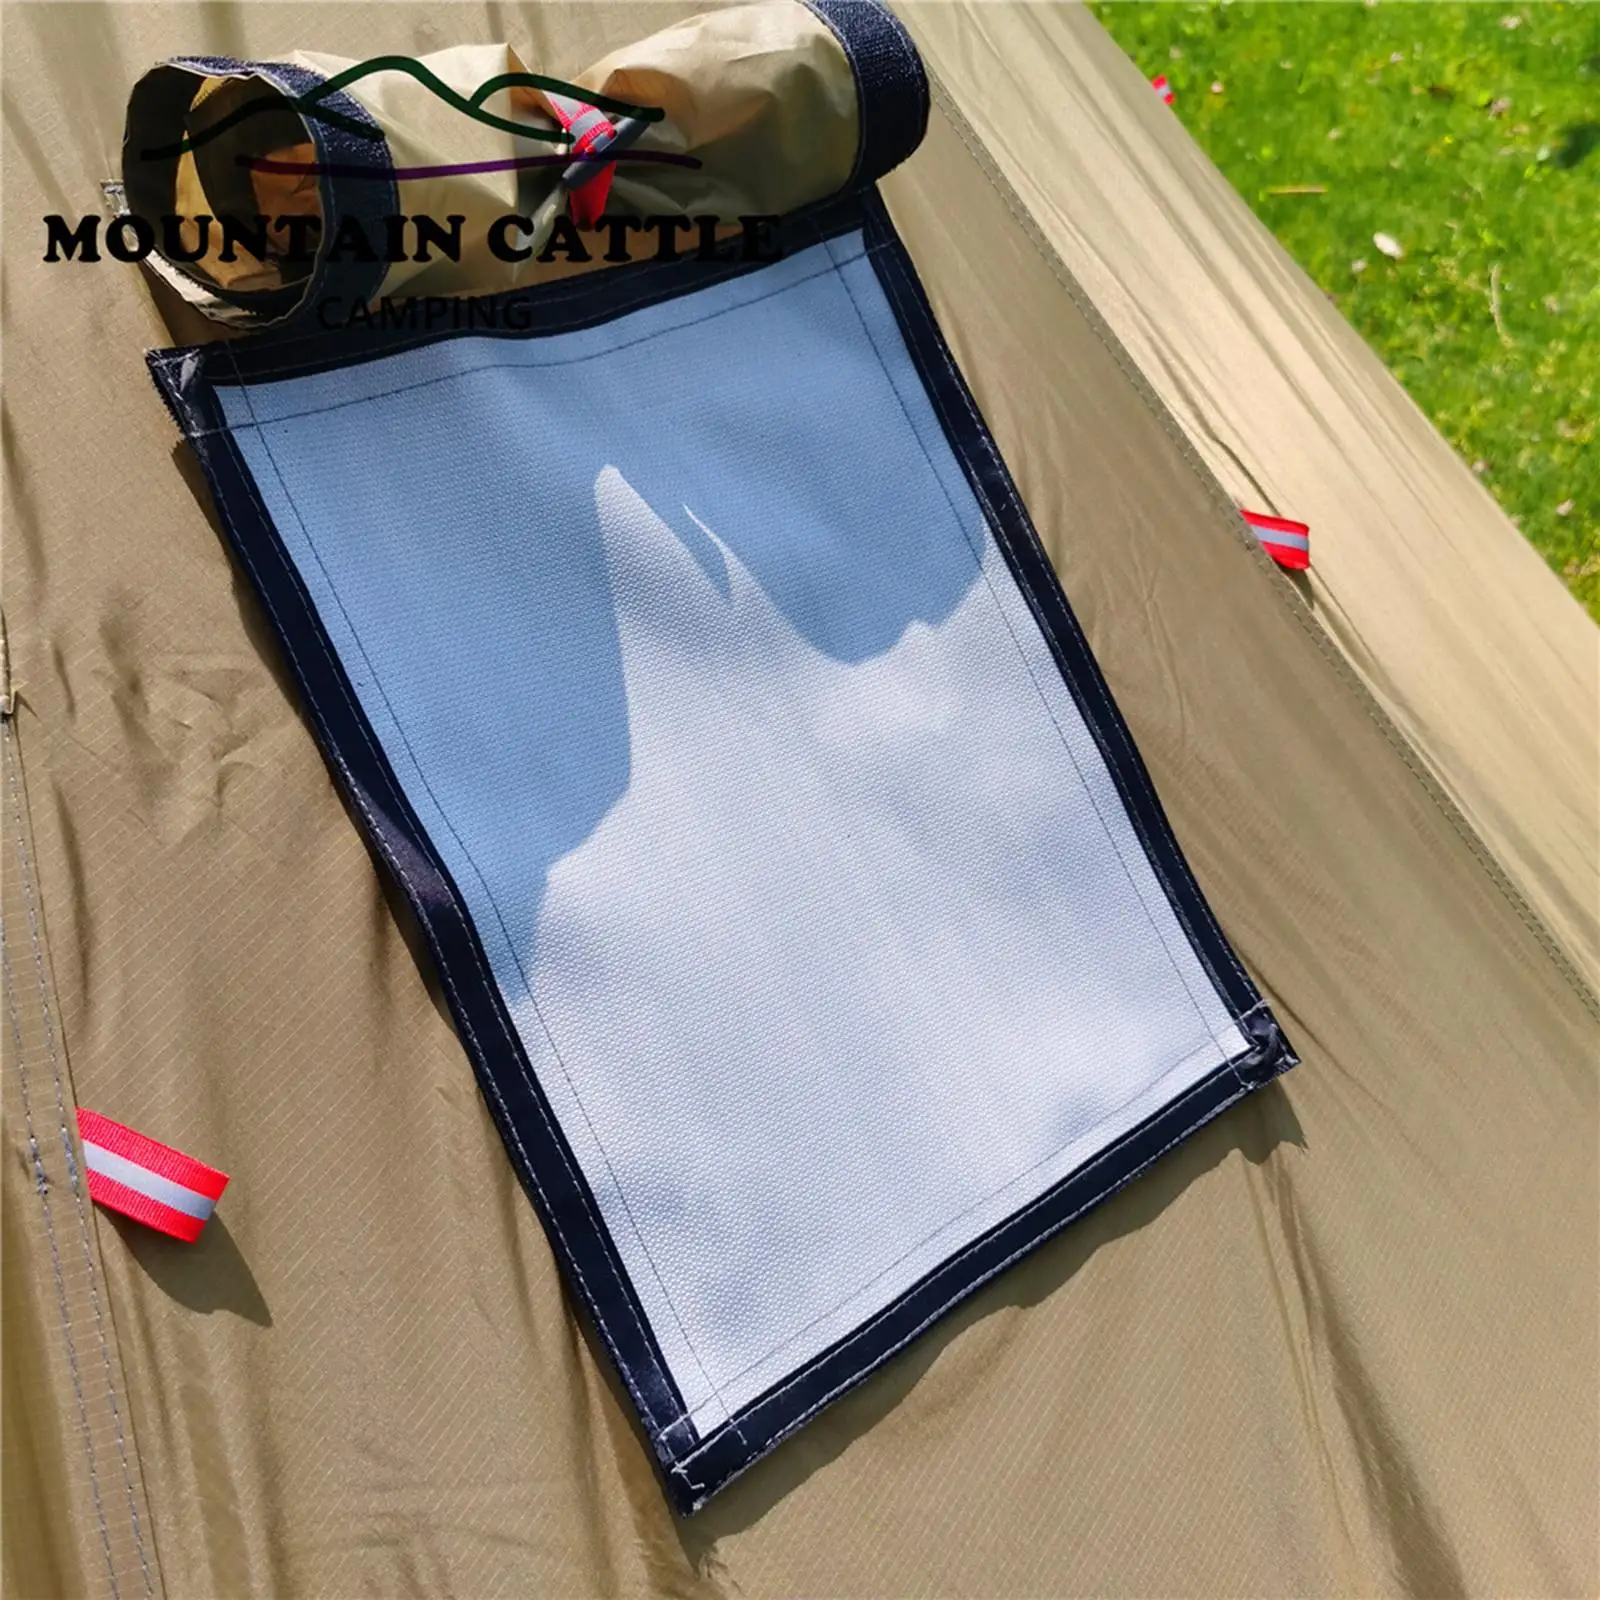 Tent Stove Fireproof Chimney Cloth Your Flue Heavy-Duty Hot Tent Stove Resistant Vent